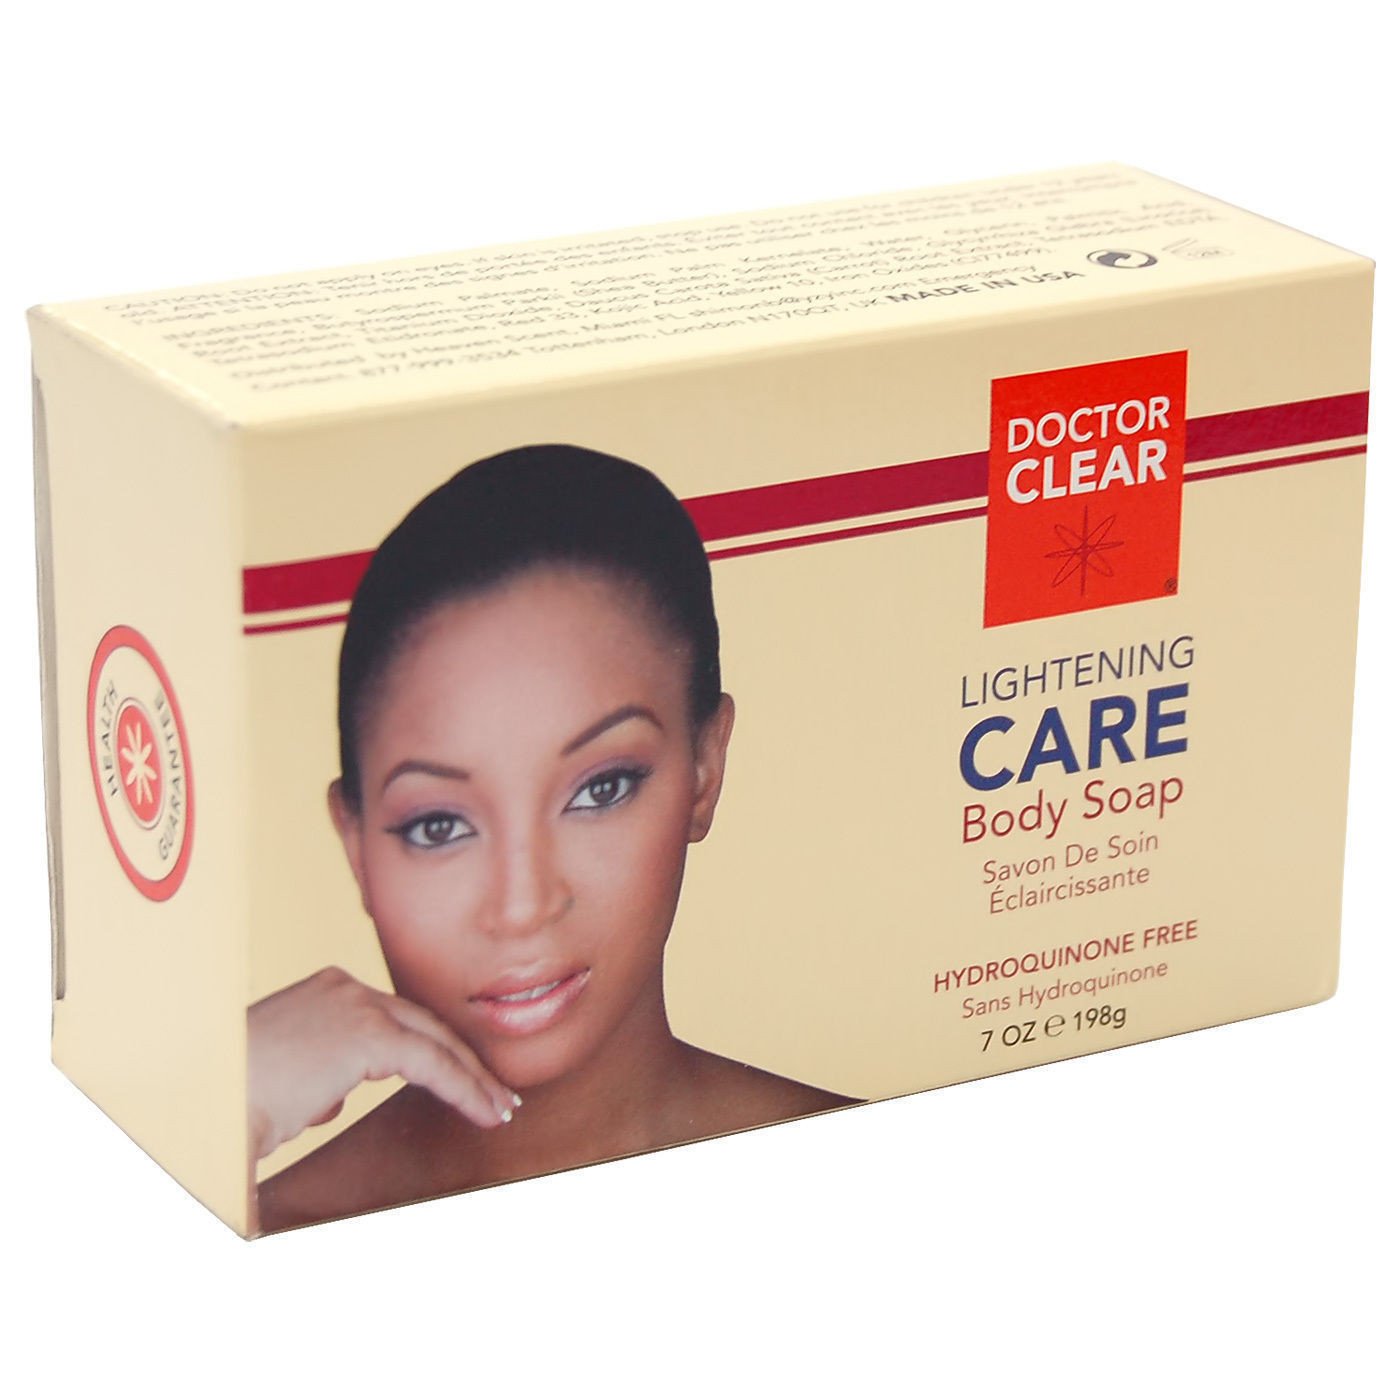 Doctor Clear – Lightening Care Body Soap 